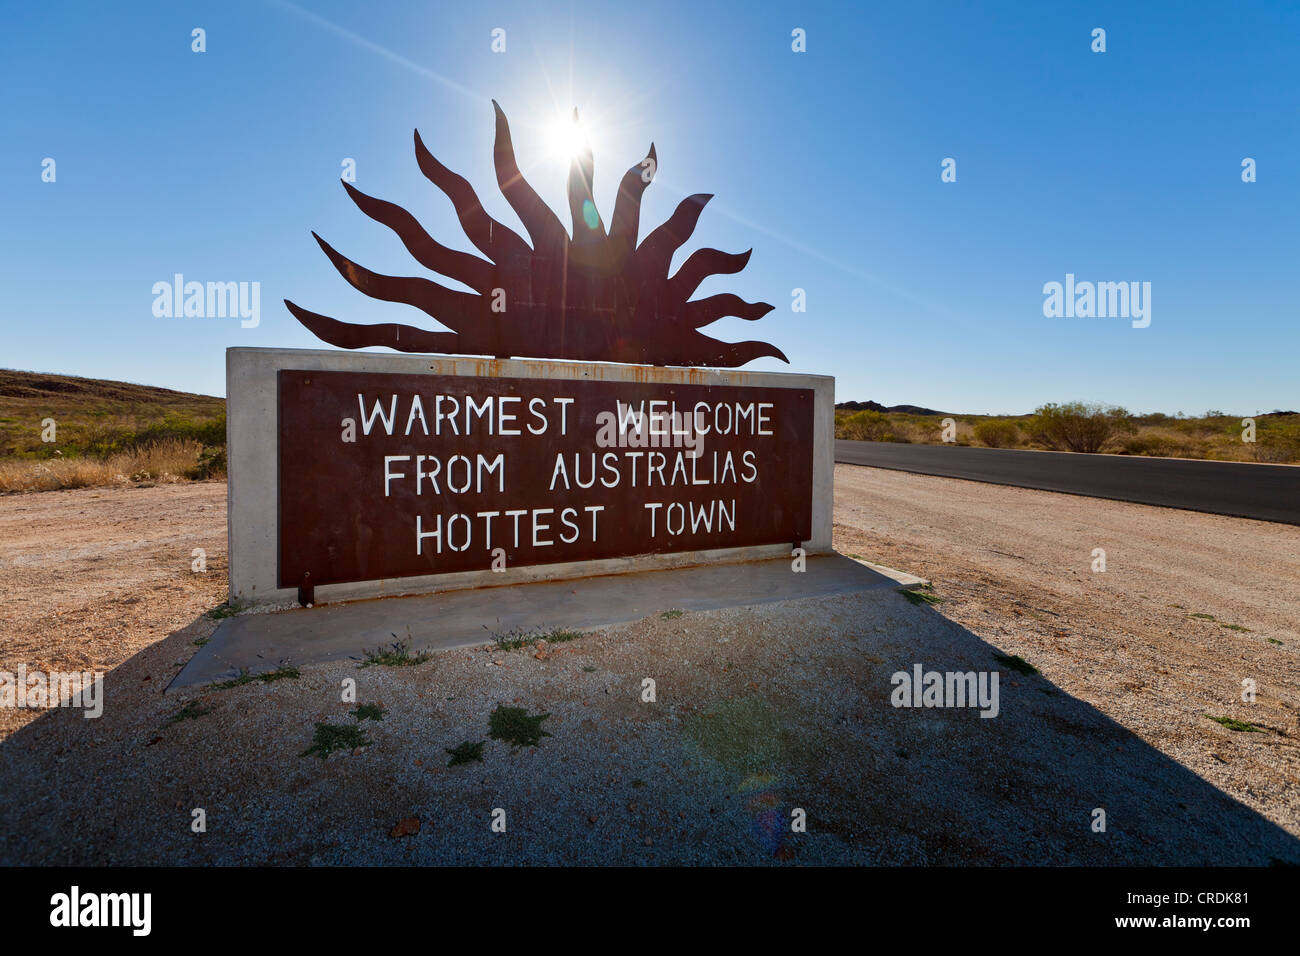 Welcome sign of Marble Bar, Australia's hottest town, Marble Bar, Western Australia, Australia Stock Photo